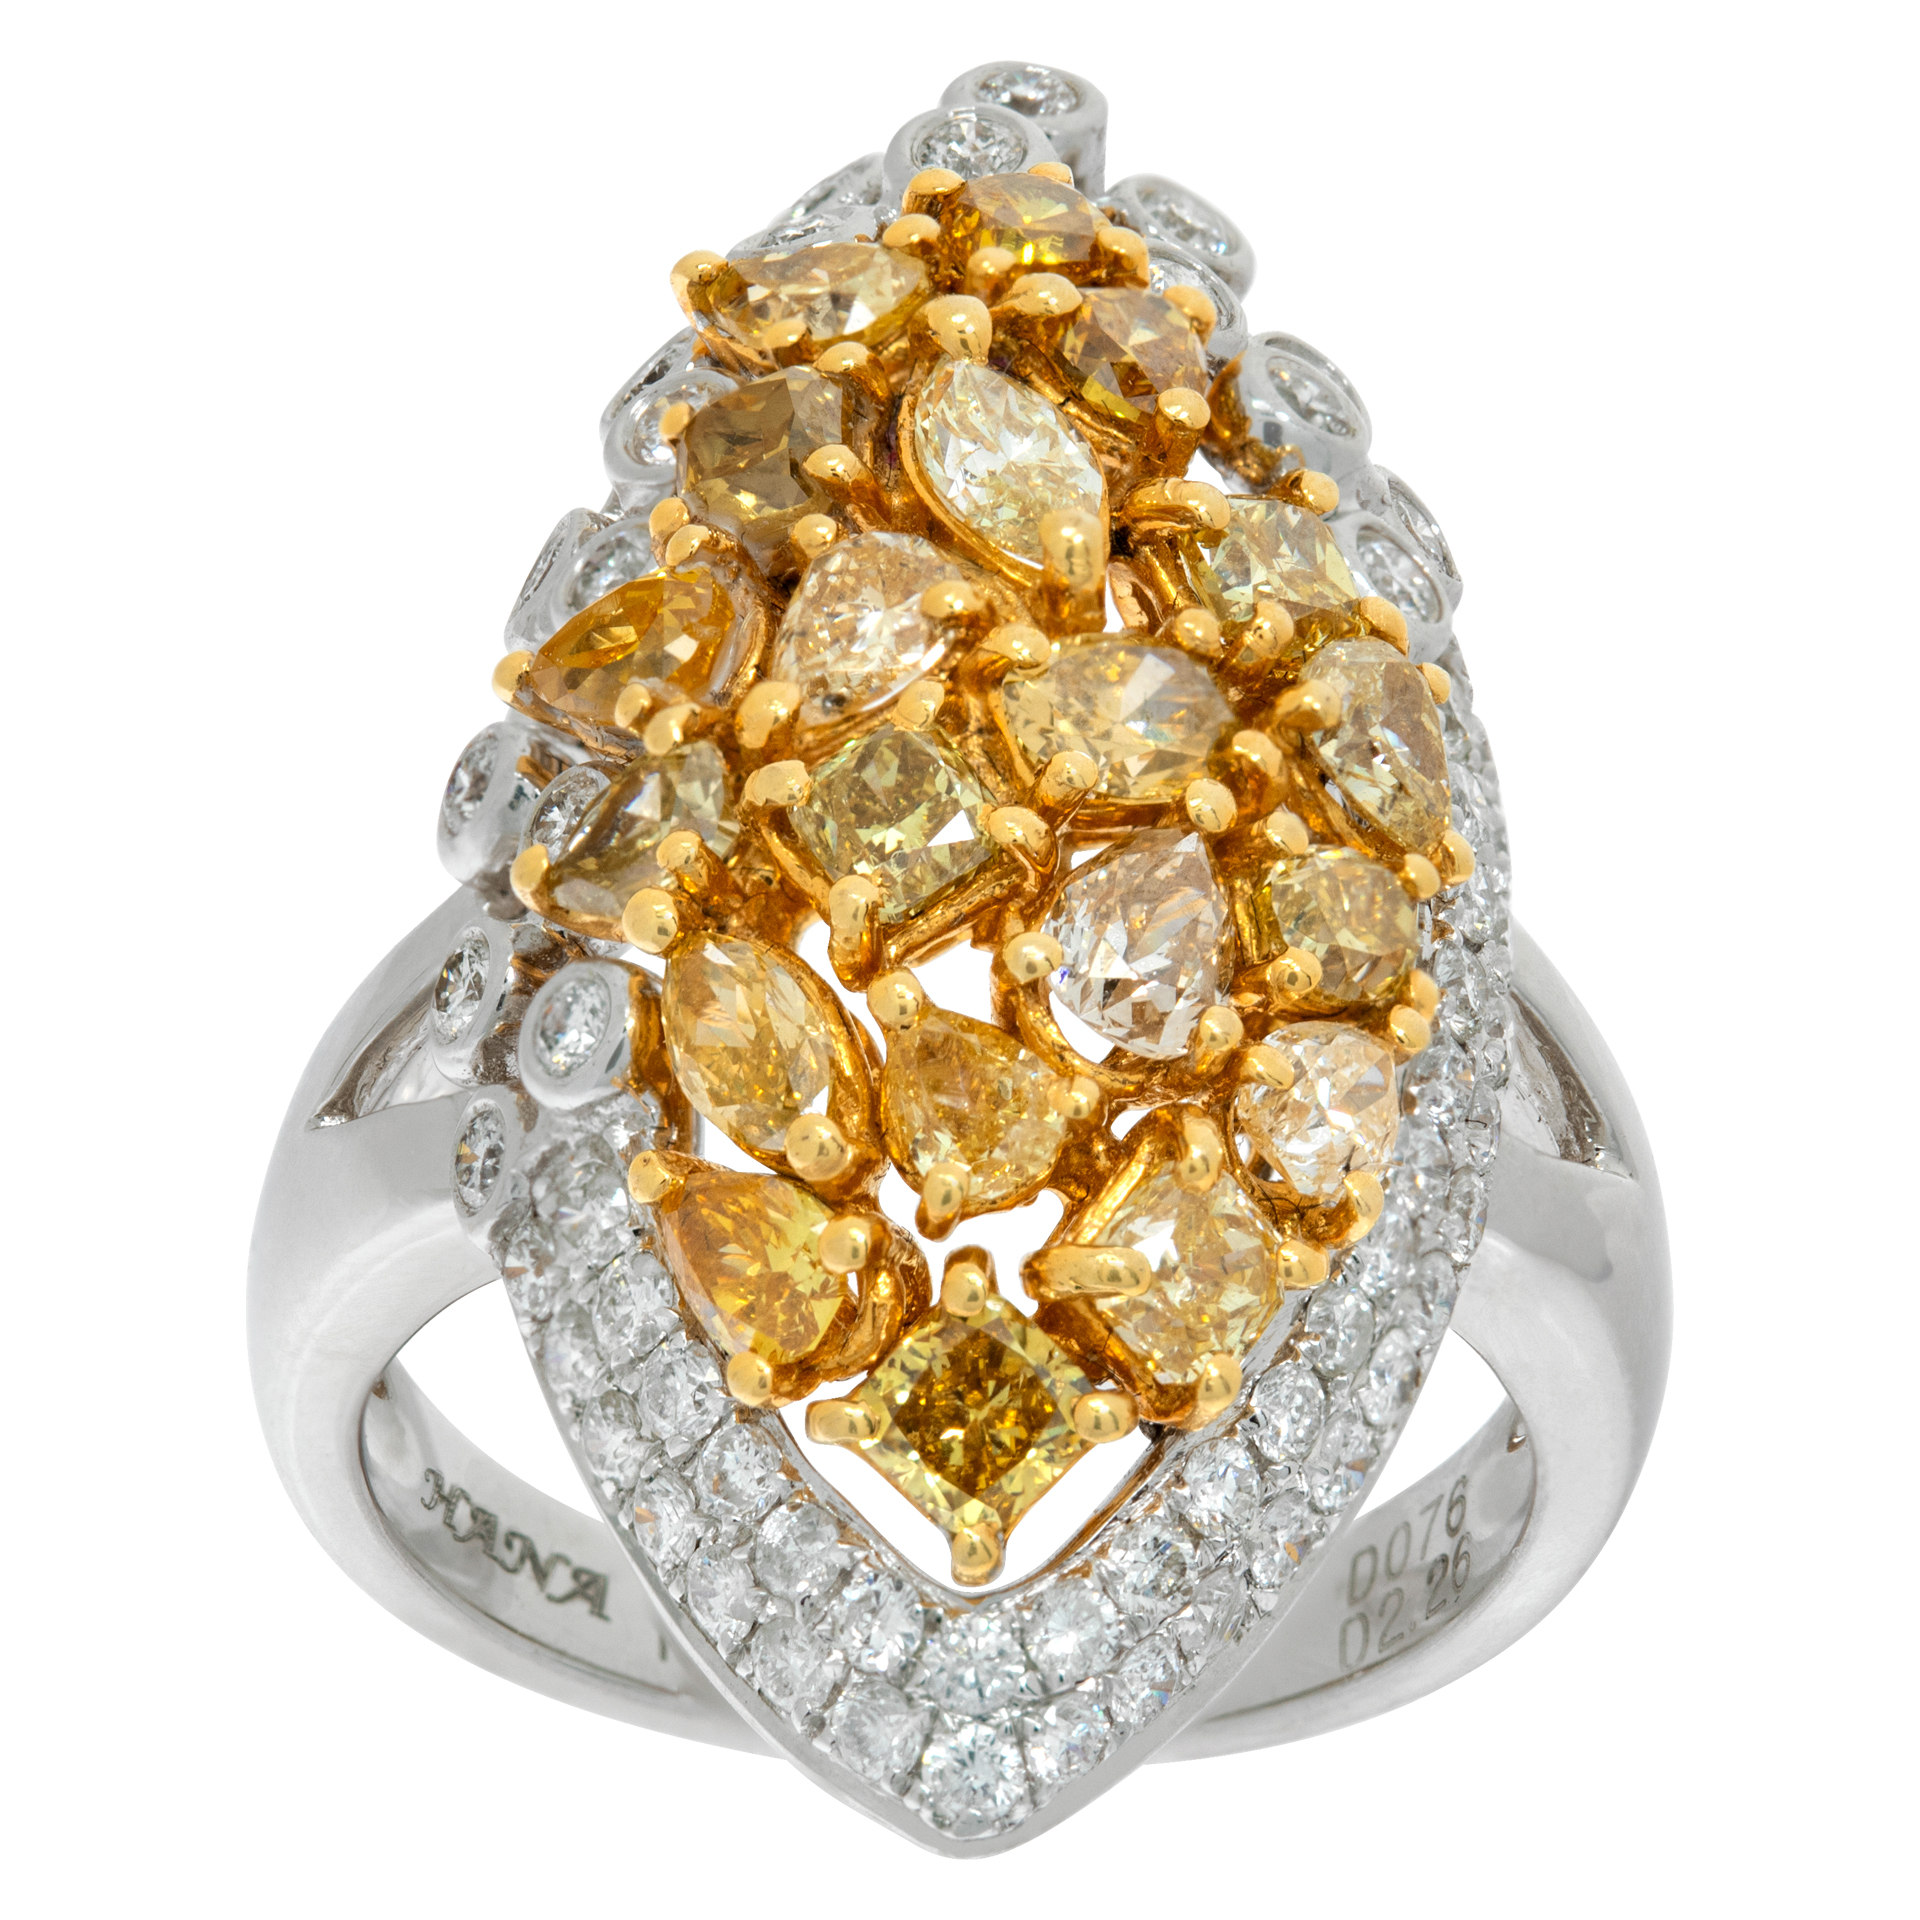 Captivating ring leads to top destinations on where to sell jewelry